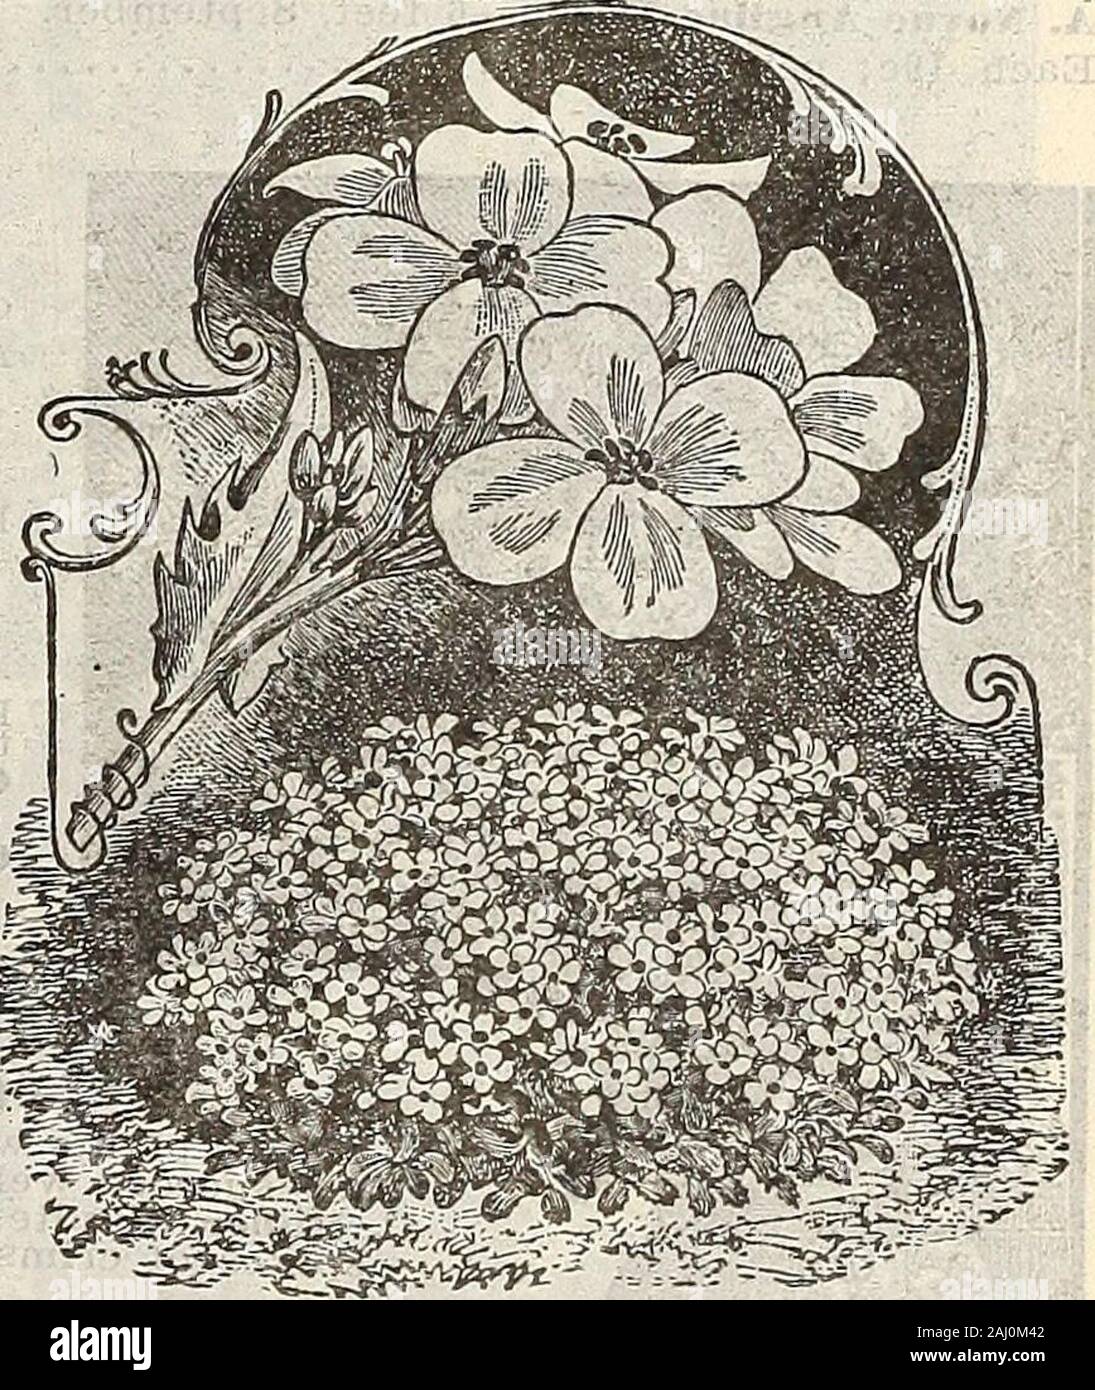 Farm and garden annual : spring 1907 . ARABIS ALPINA. SPECIAL.For choice assortments of popular HARDYPLANTS, see *he very low-priced collectionsoffered on page 113. ARABIS—Rock Cress.Alplna—A dwarf growing plant, very suit-able for rockwork; flowers -white, very early. Each 10c; per doz. .... . $1.00 AJLGA.Reptans—4 inches. May. Blue; valuablefor rockwork. Each 15c; per doz..$.1.50 102 CURRIE BROTHERS COMPANY, MILWAUKEE, WIS. Stock Photo